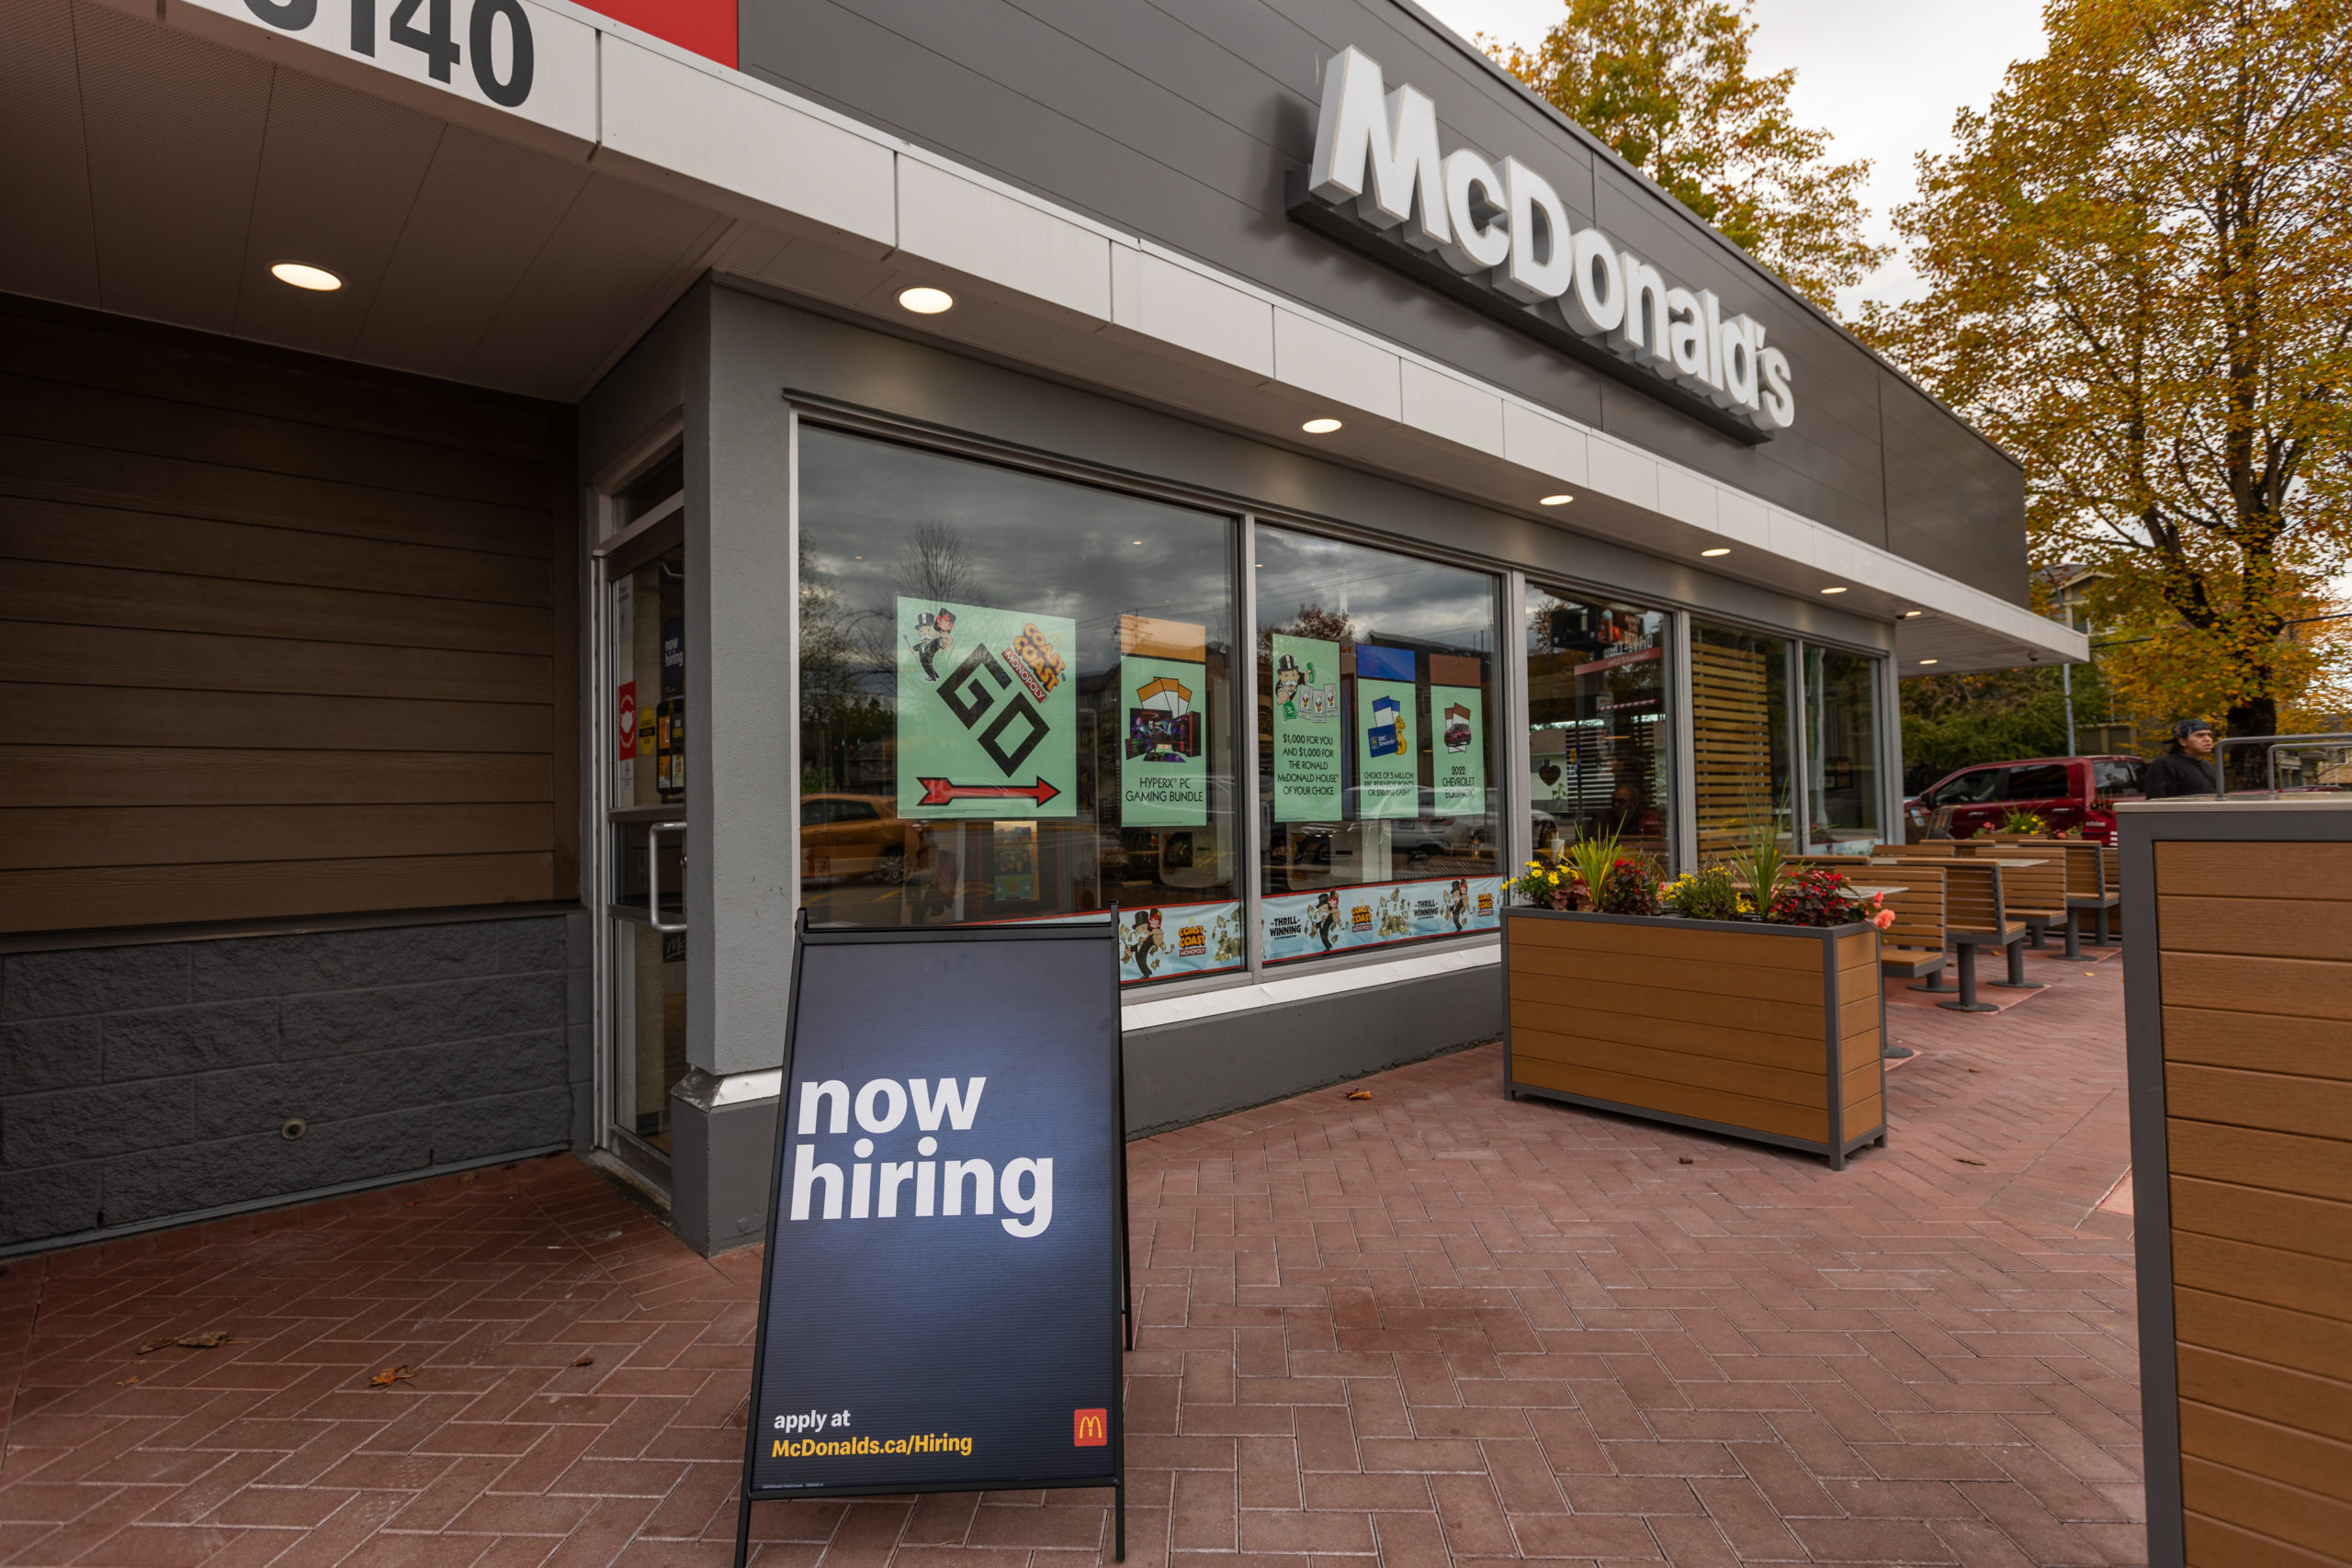 McDonald's restaurant with hiring sign out front